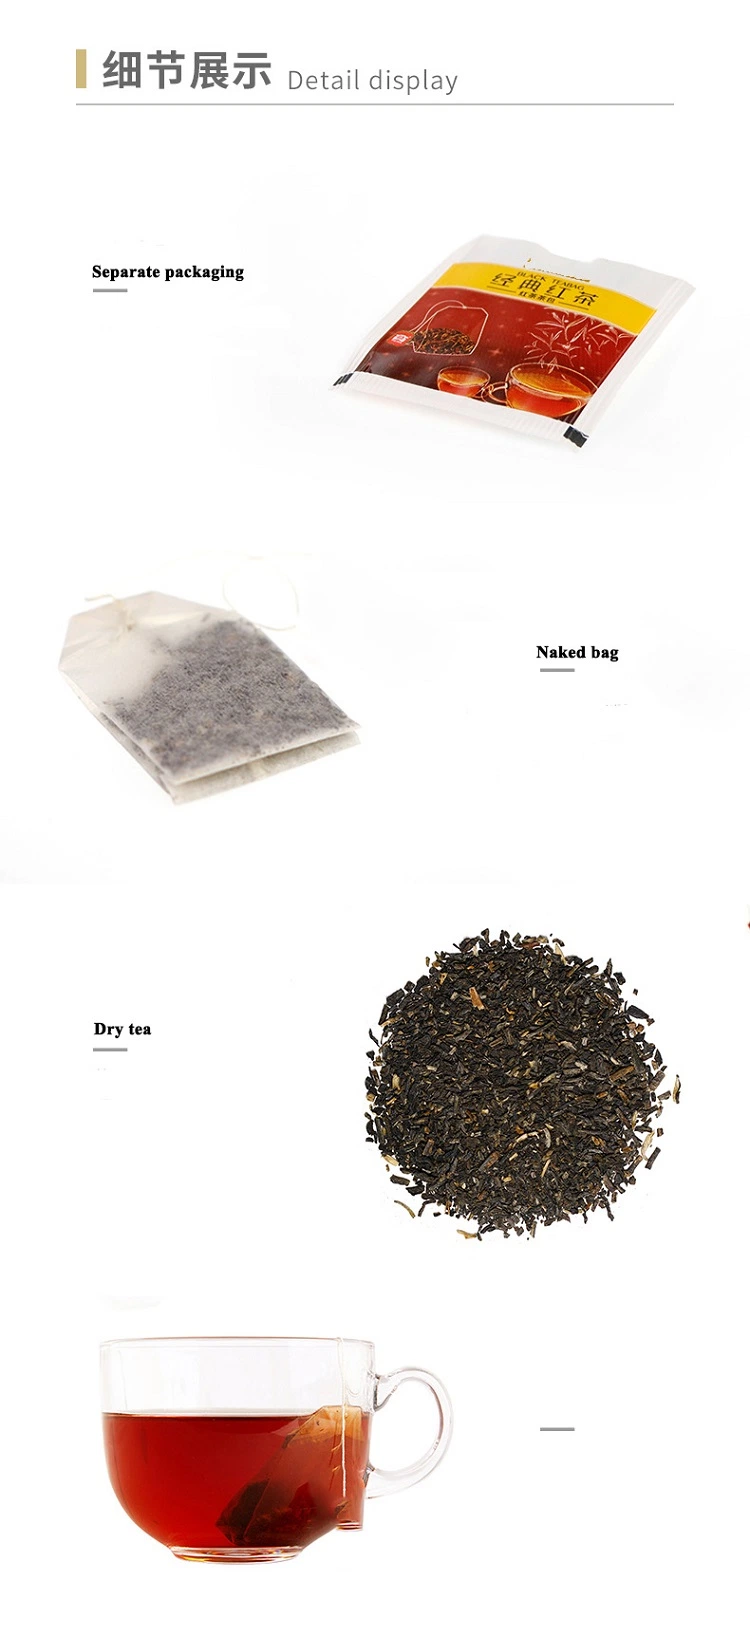 Special Quality Handmade Health Organic Black Tea Bag for Breakfast and Afternoon Tea